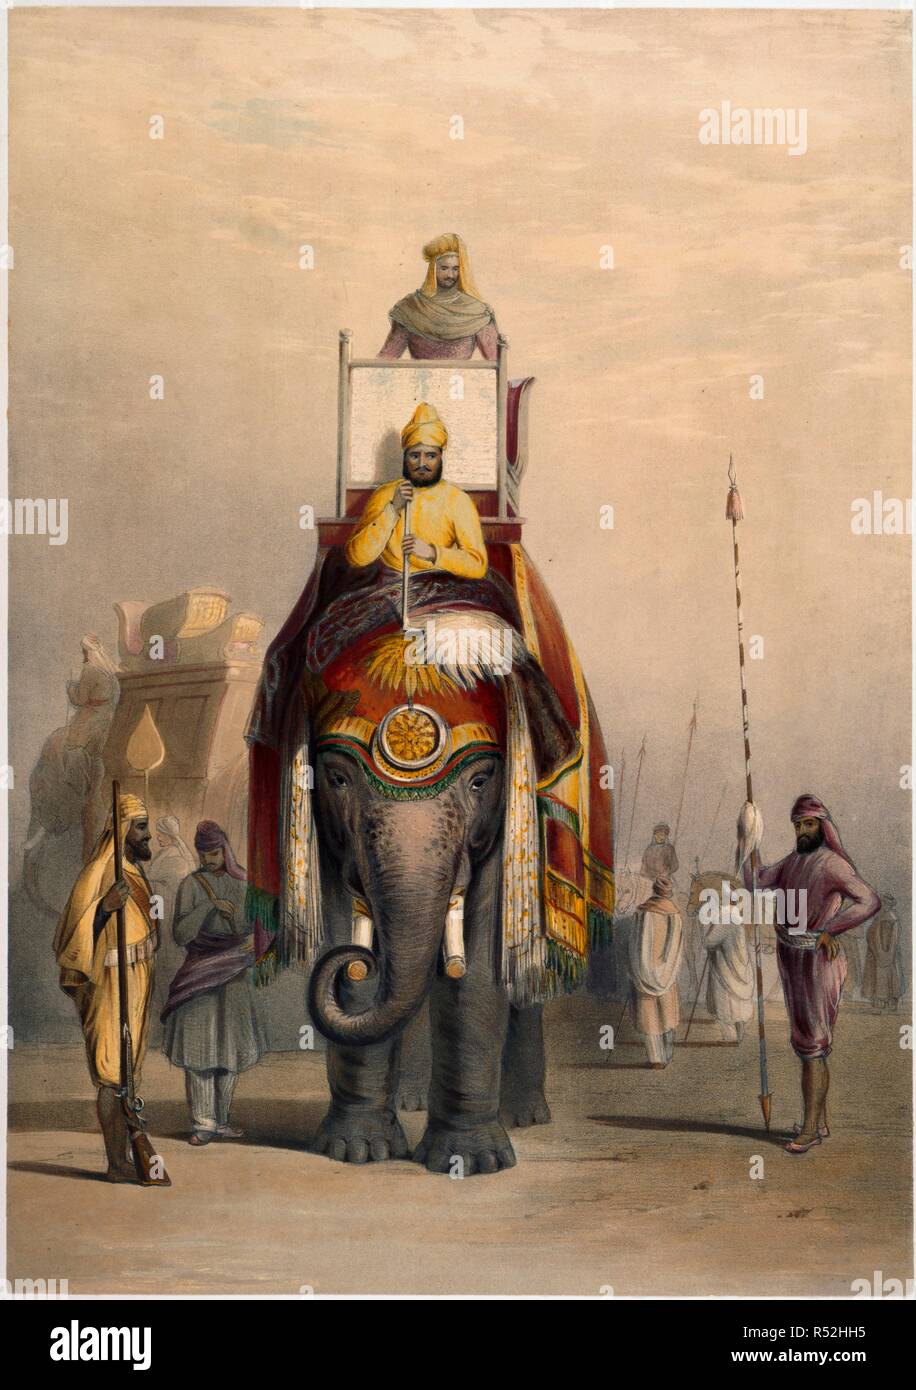 The rajah of Putteealla. Portraits Of The Princes & People Of India. London, J. Dickinson & Son, 1844. Maharaja Karm Singh of Patiala (ruled from 1813 to 1845) with guards and escort, on his state elephant.  Image taken from Portraits Of The Princes & People Of India.  Originally published/produced in London, J. Dickinson & Son, 1844. . Source: X 546, plate 6. Language: English. Author: Eden, Emily. Eden. Emily. Dickinson, Lowes Cato. Stock Photo